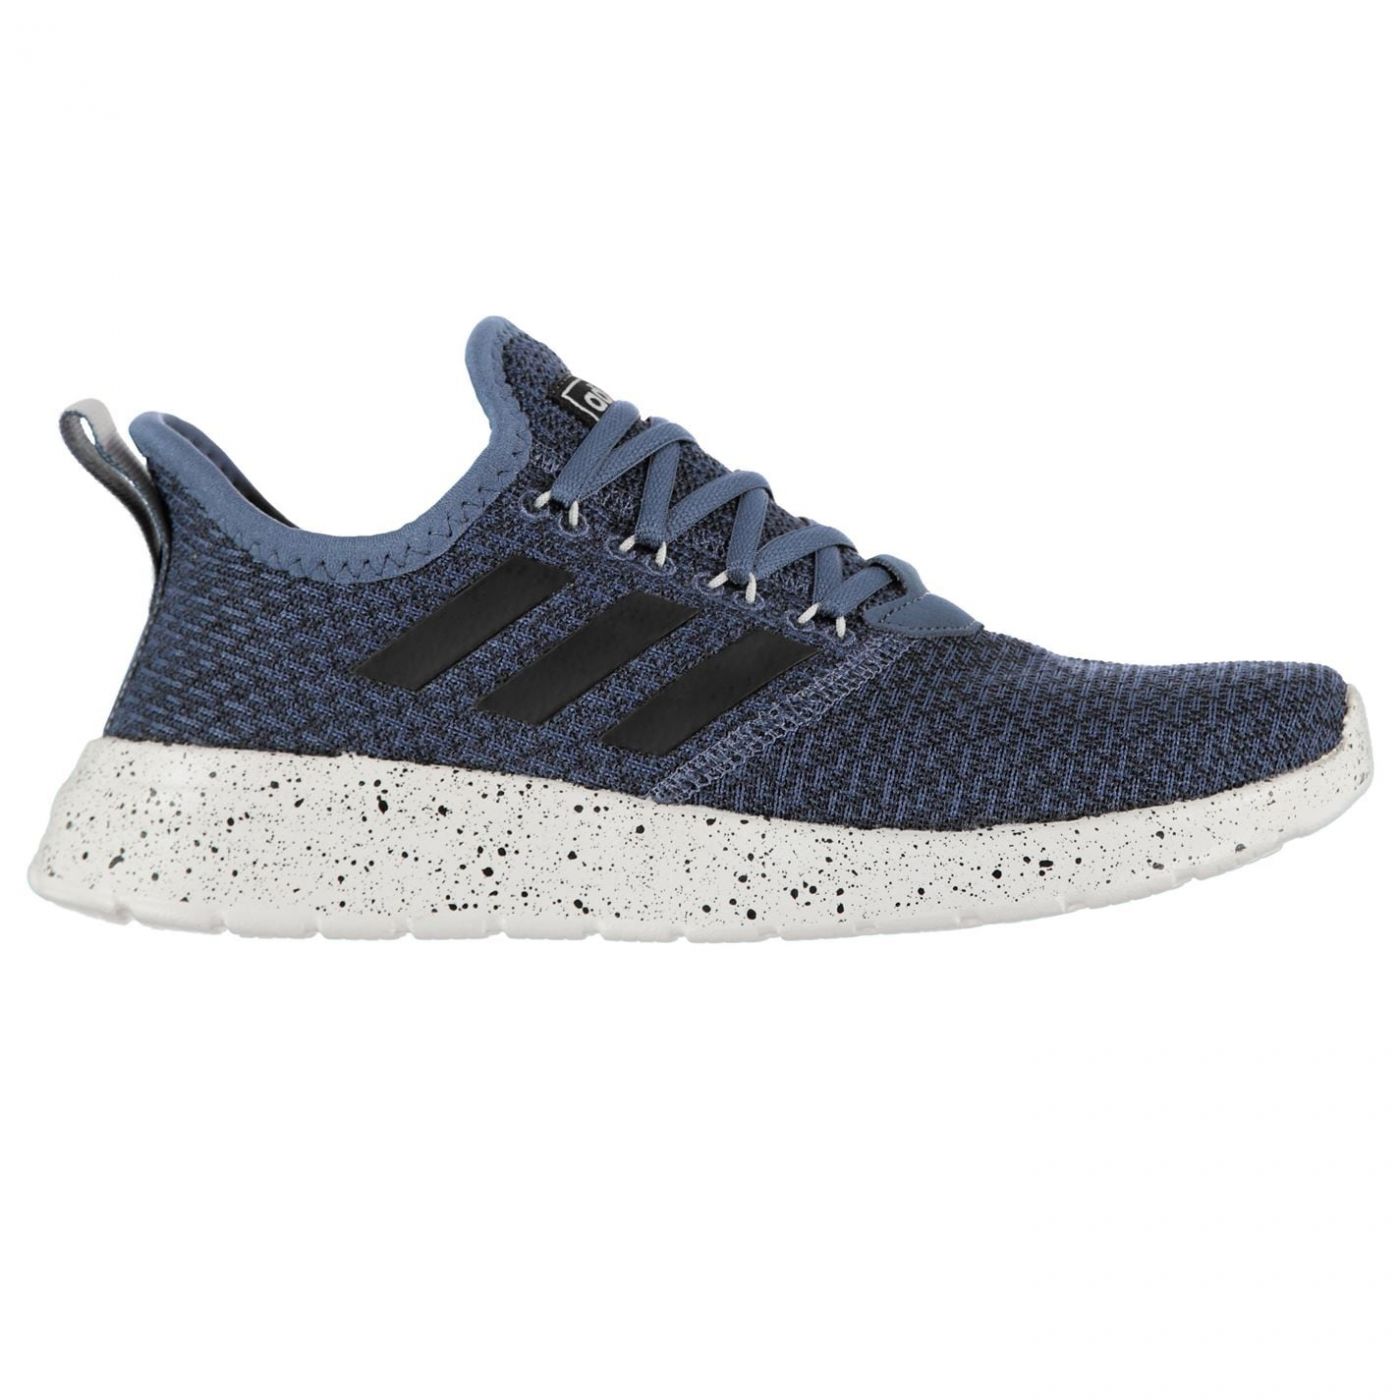 Adidas Racer Reborn Knit Trainers Mens